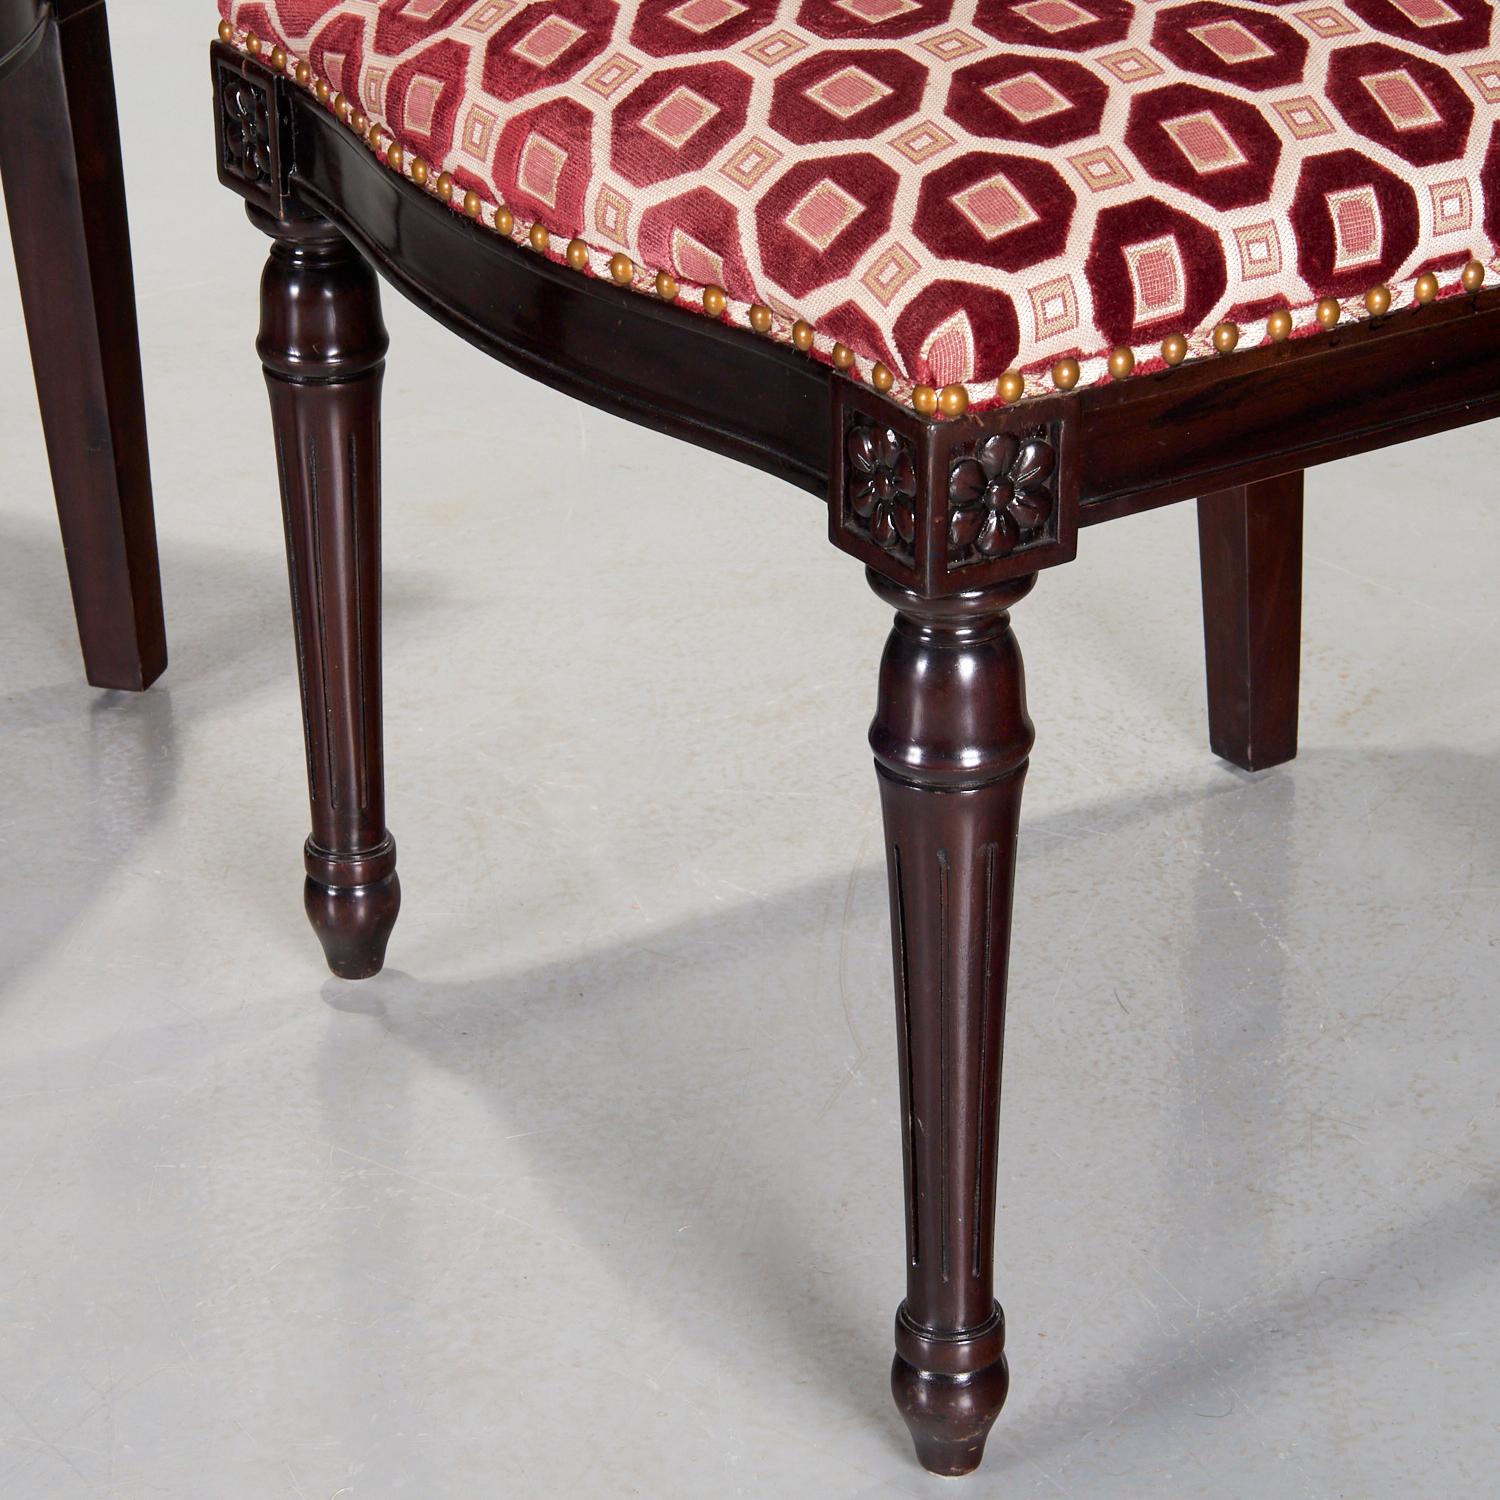 Hand-Carved Pair Oly Studio Louis XVI Style Chairs Upholstered in Geometric Cut Velvet